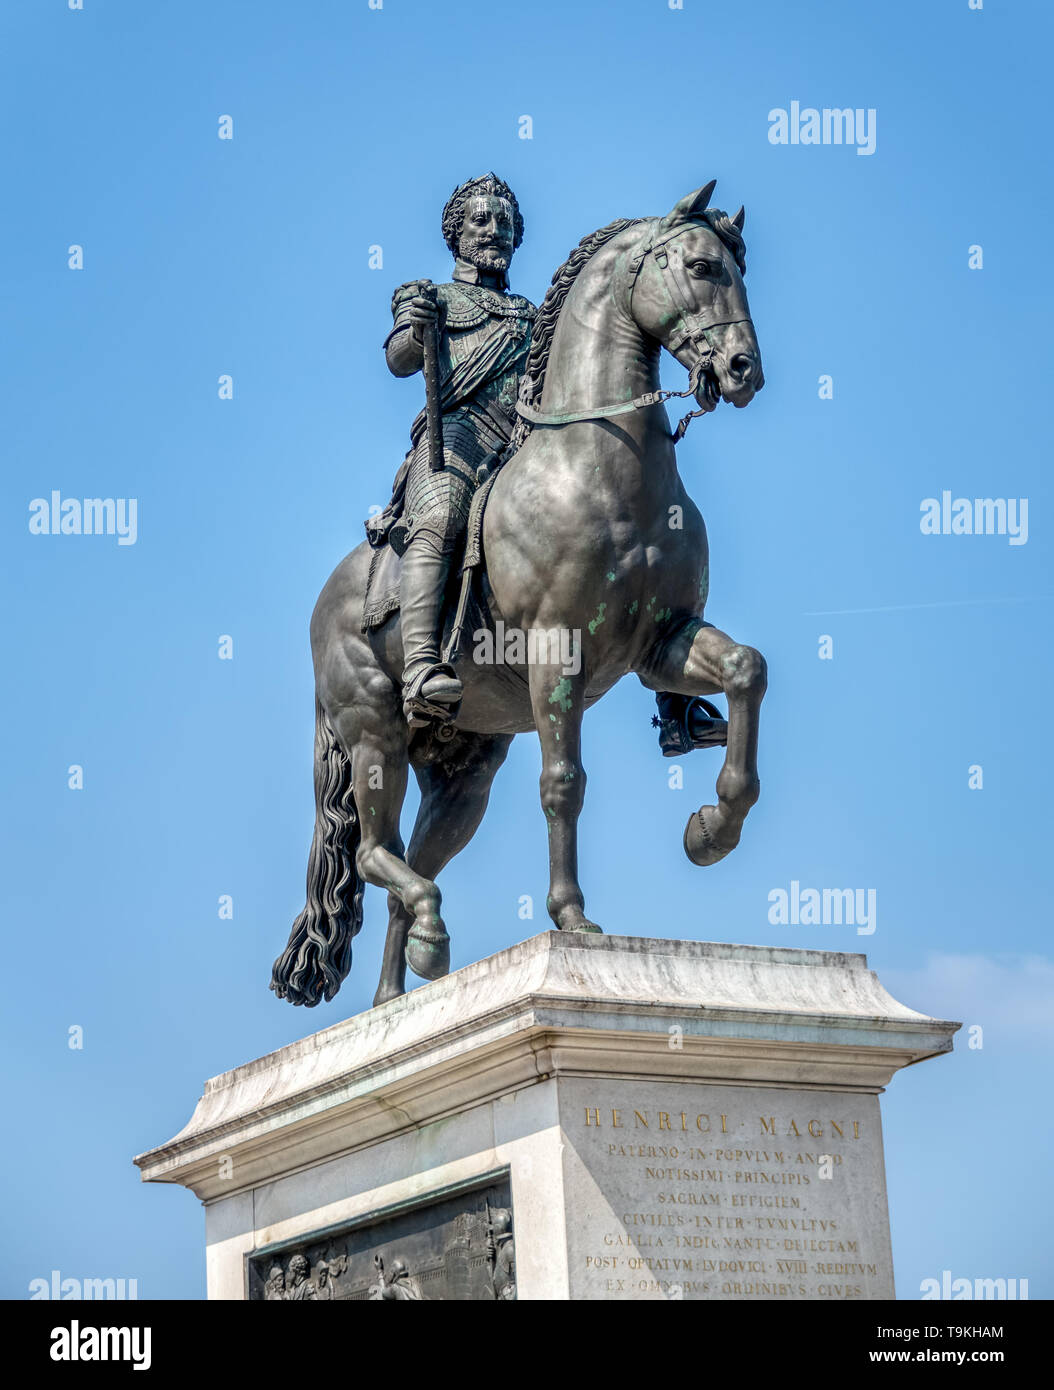 Statue of Henry IV by Pont Neuf - Paris, France Stock Photo